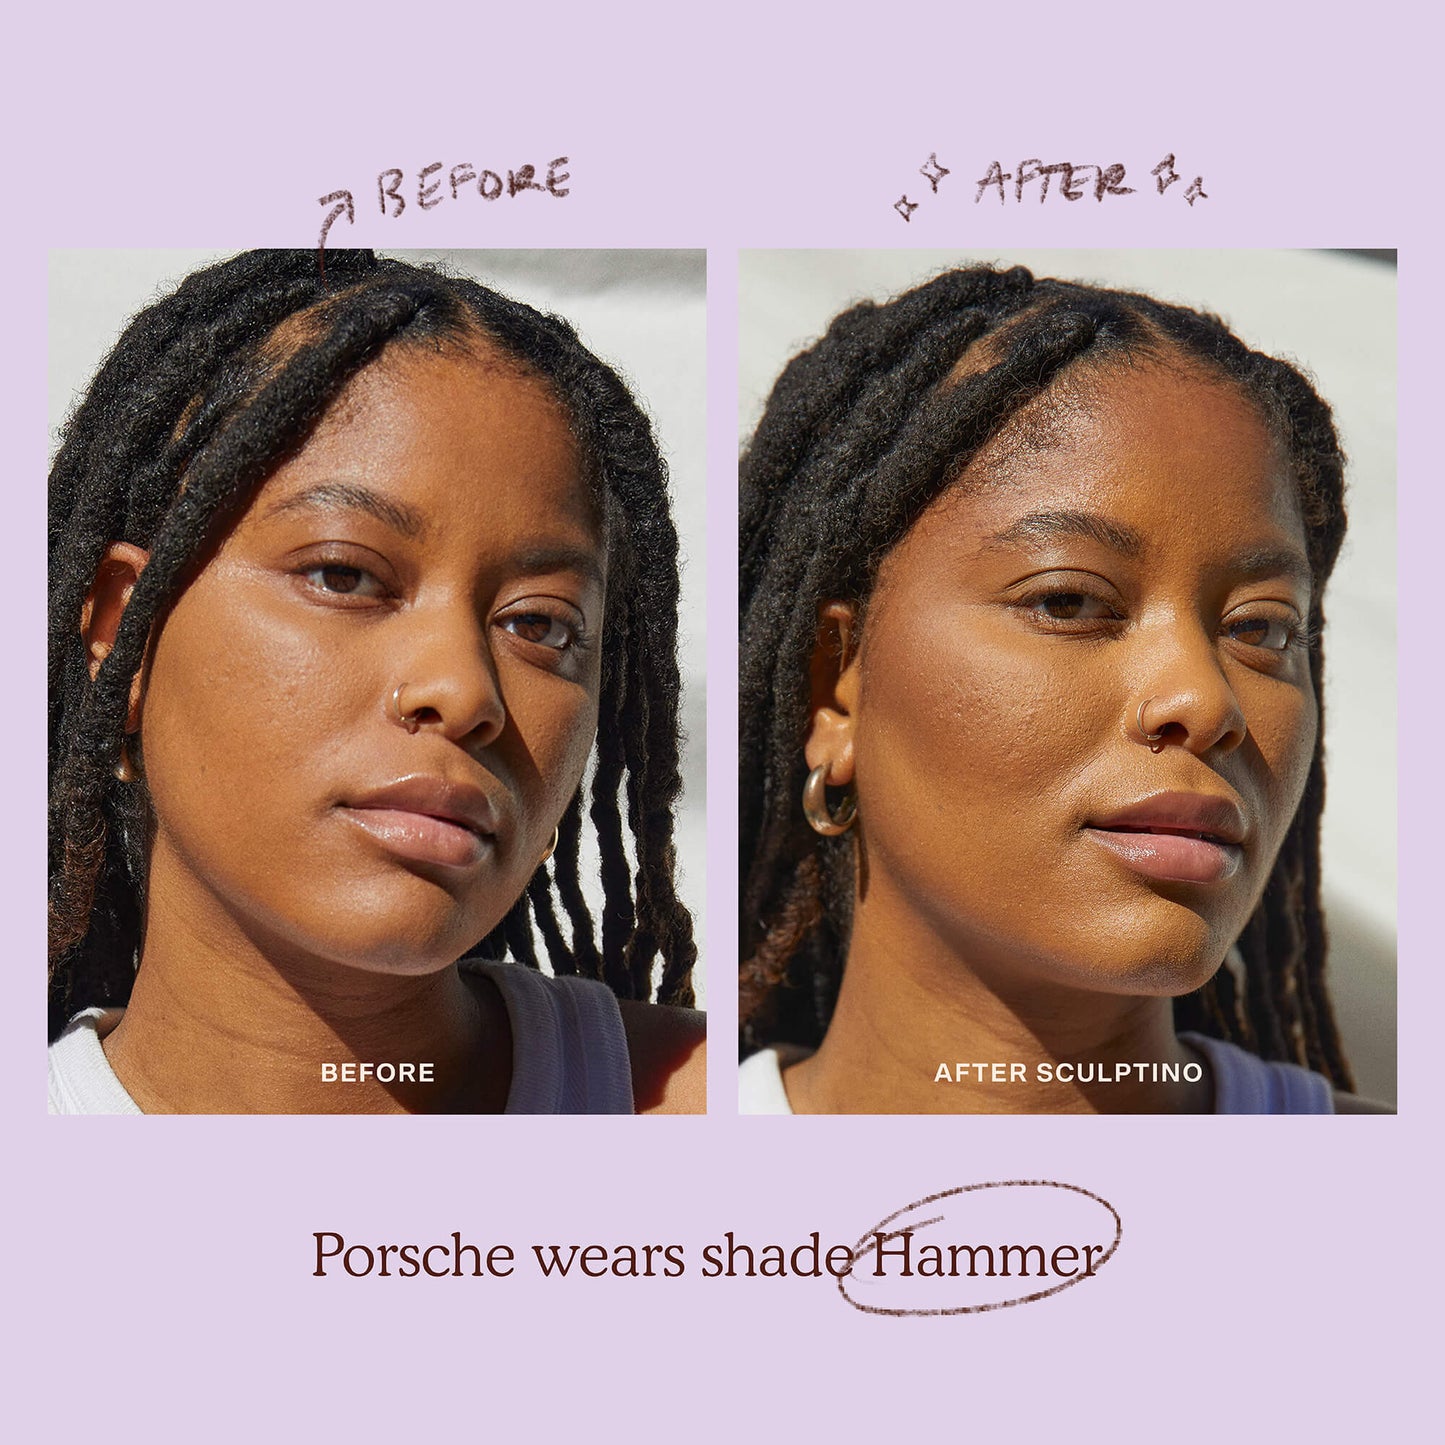 Shade: Hammer [A model before and after applying the Tower 28 Beauty Sculptino™ Cream Contour in the shade Hammer]